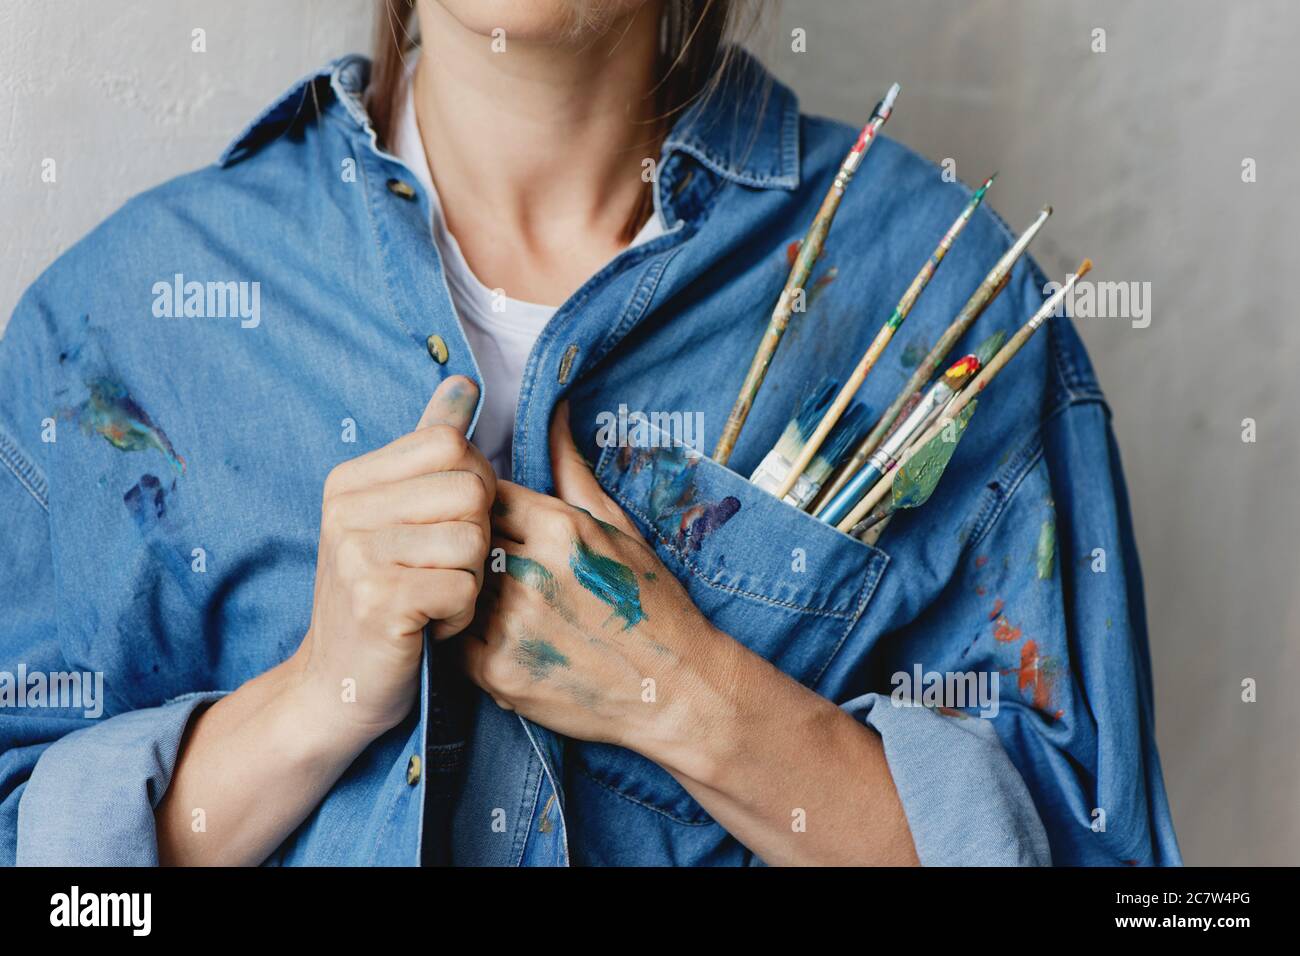 Cropped image of woman with paint brushes and palette knife placed in the pocket of her denim shirt. Stock Photo